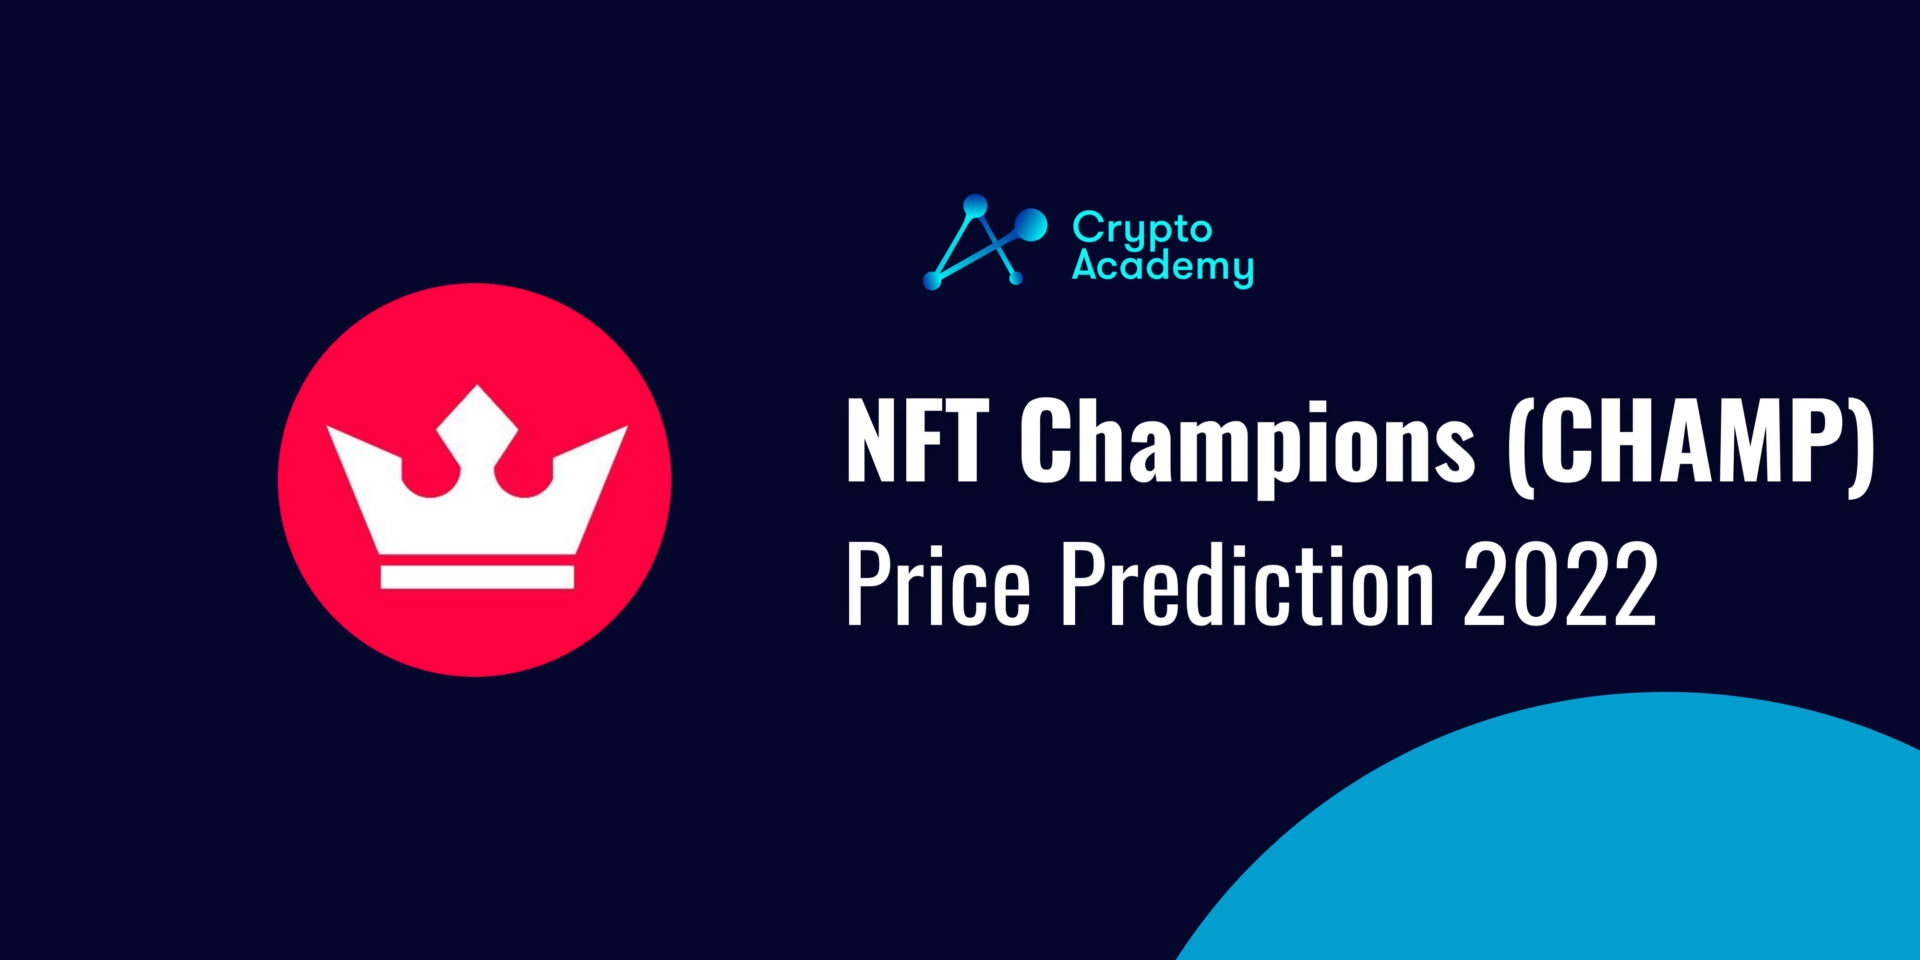 NFT Champions Price Prediction 2022 and Beyond - Will CHAMP Reach $10?